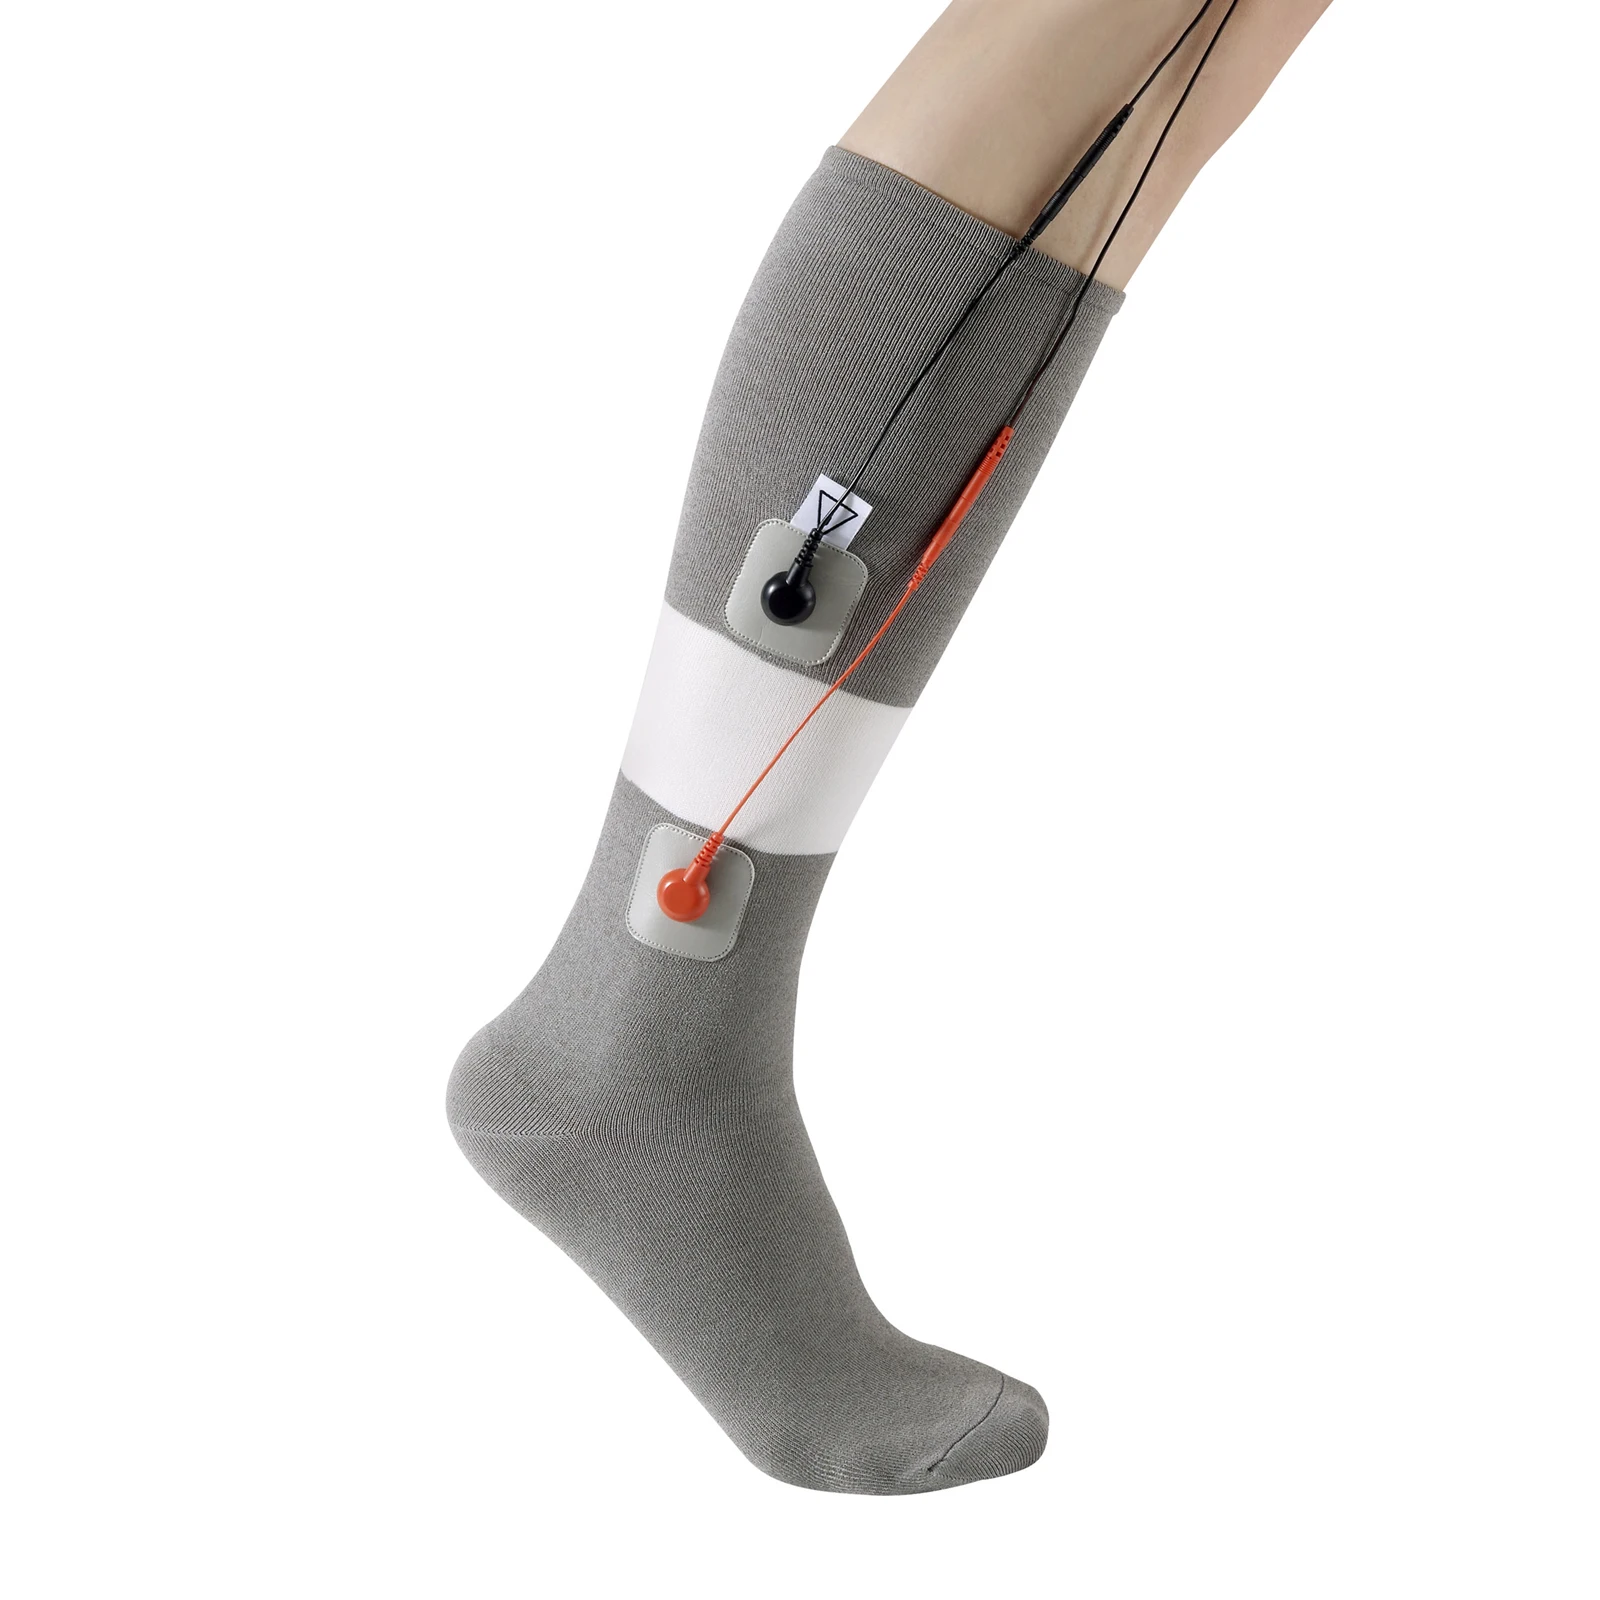 Rehabilitation Therapy Sock for Blood Circulation